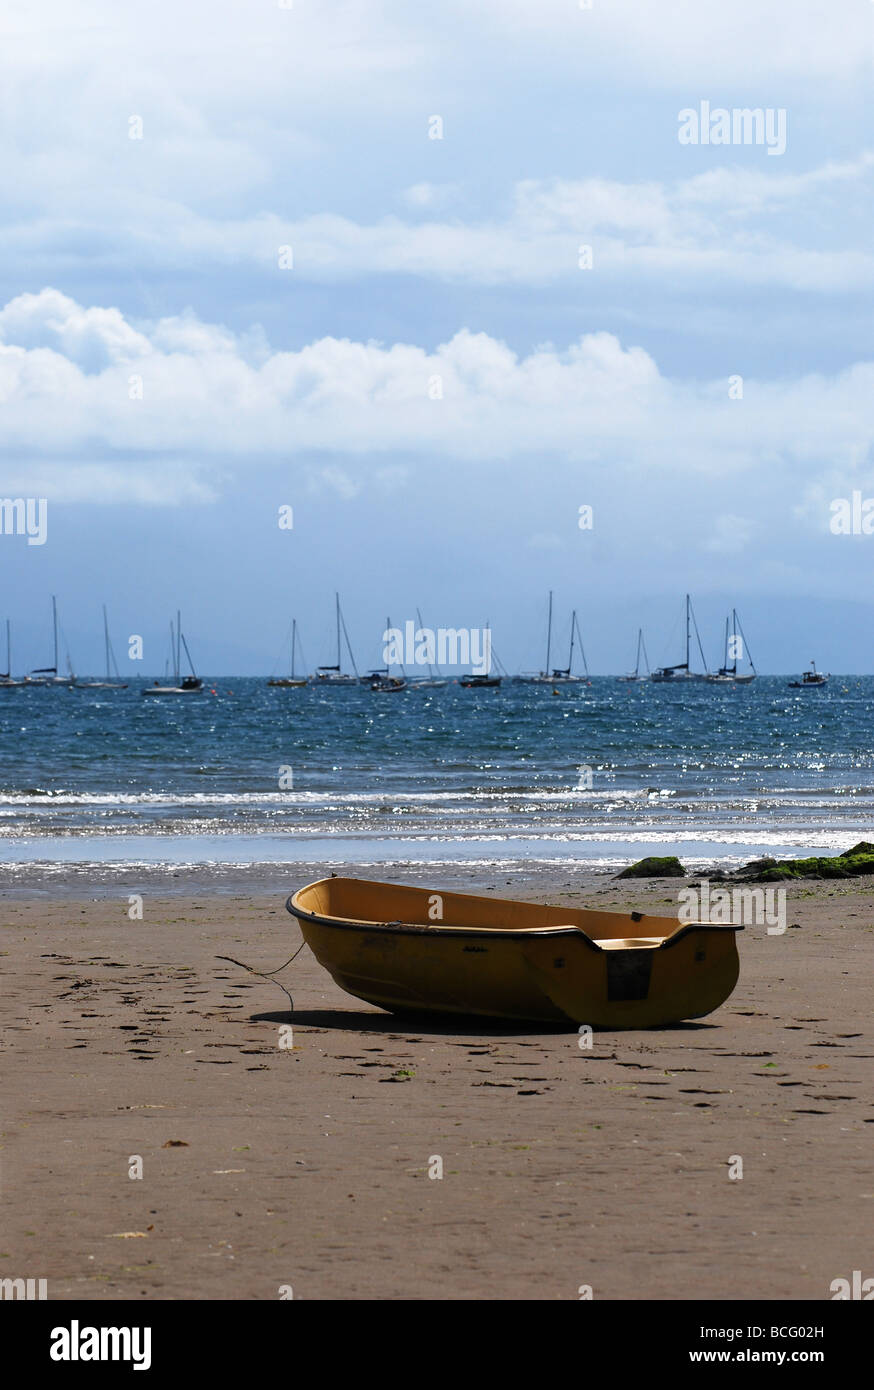 yellow tender beached at abersoch no 2734 Stock Photo